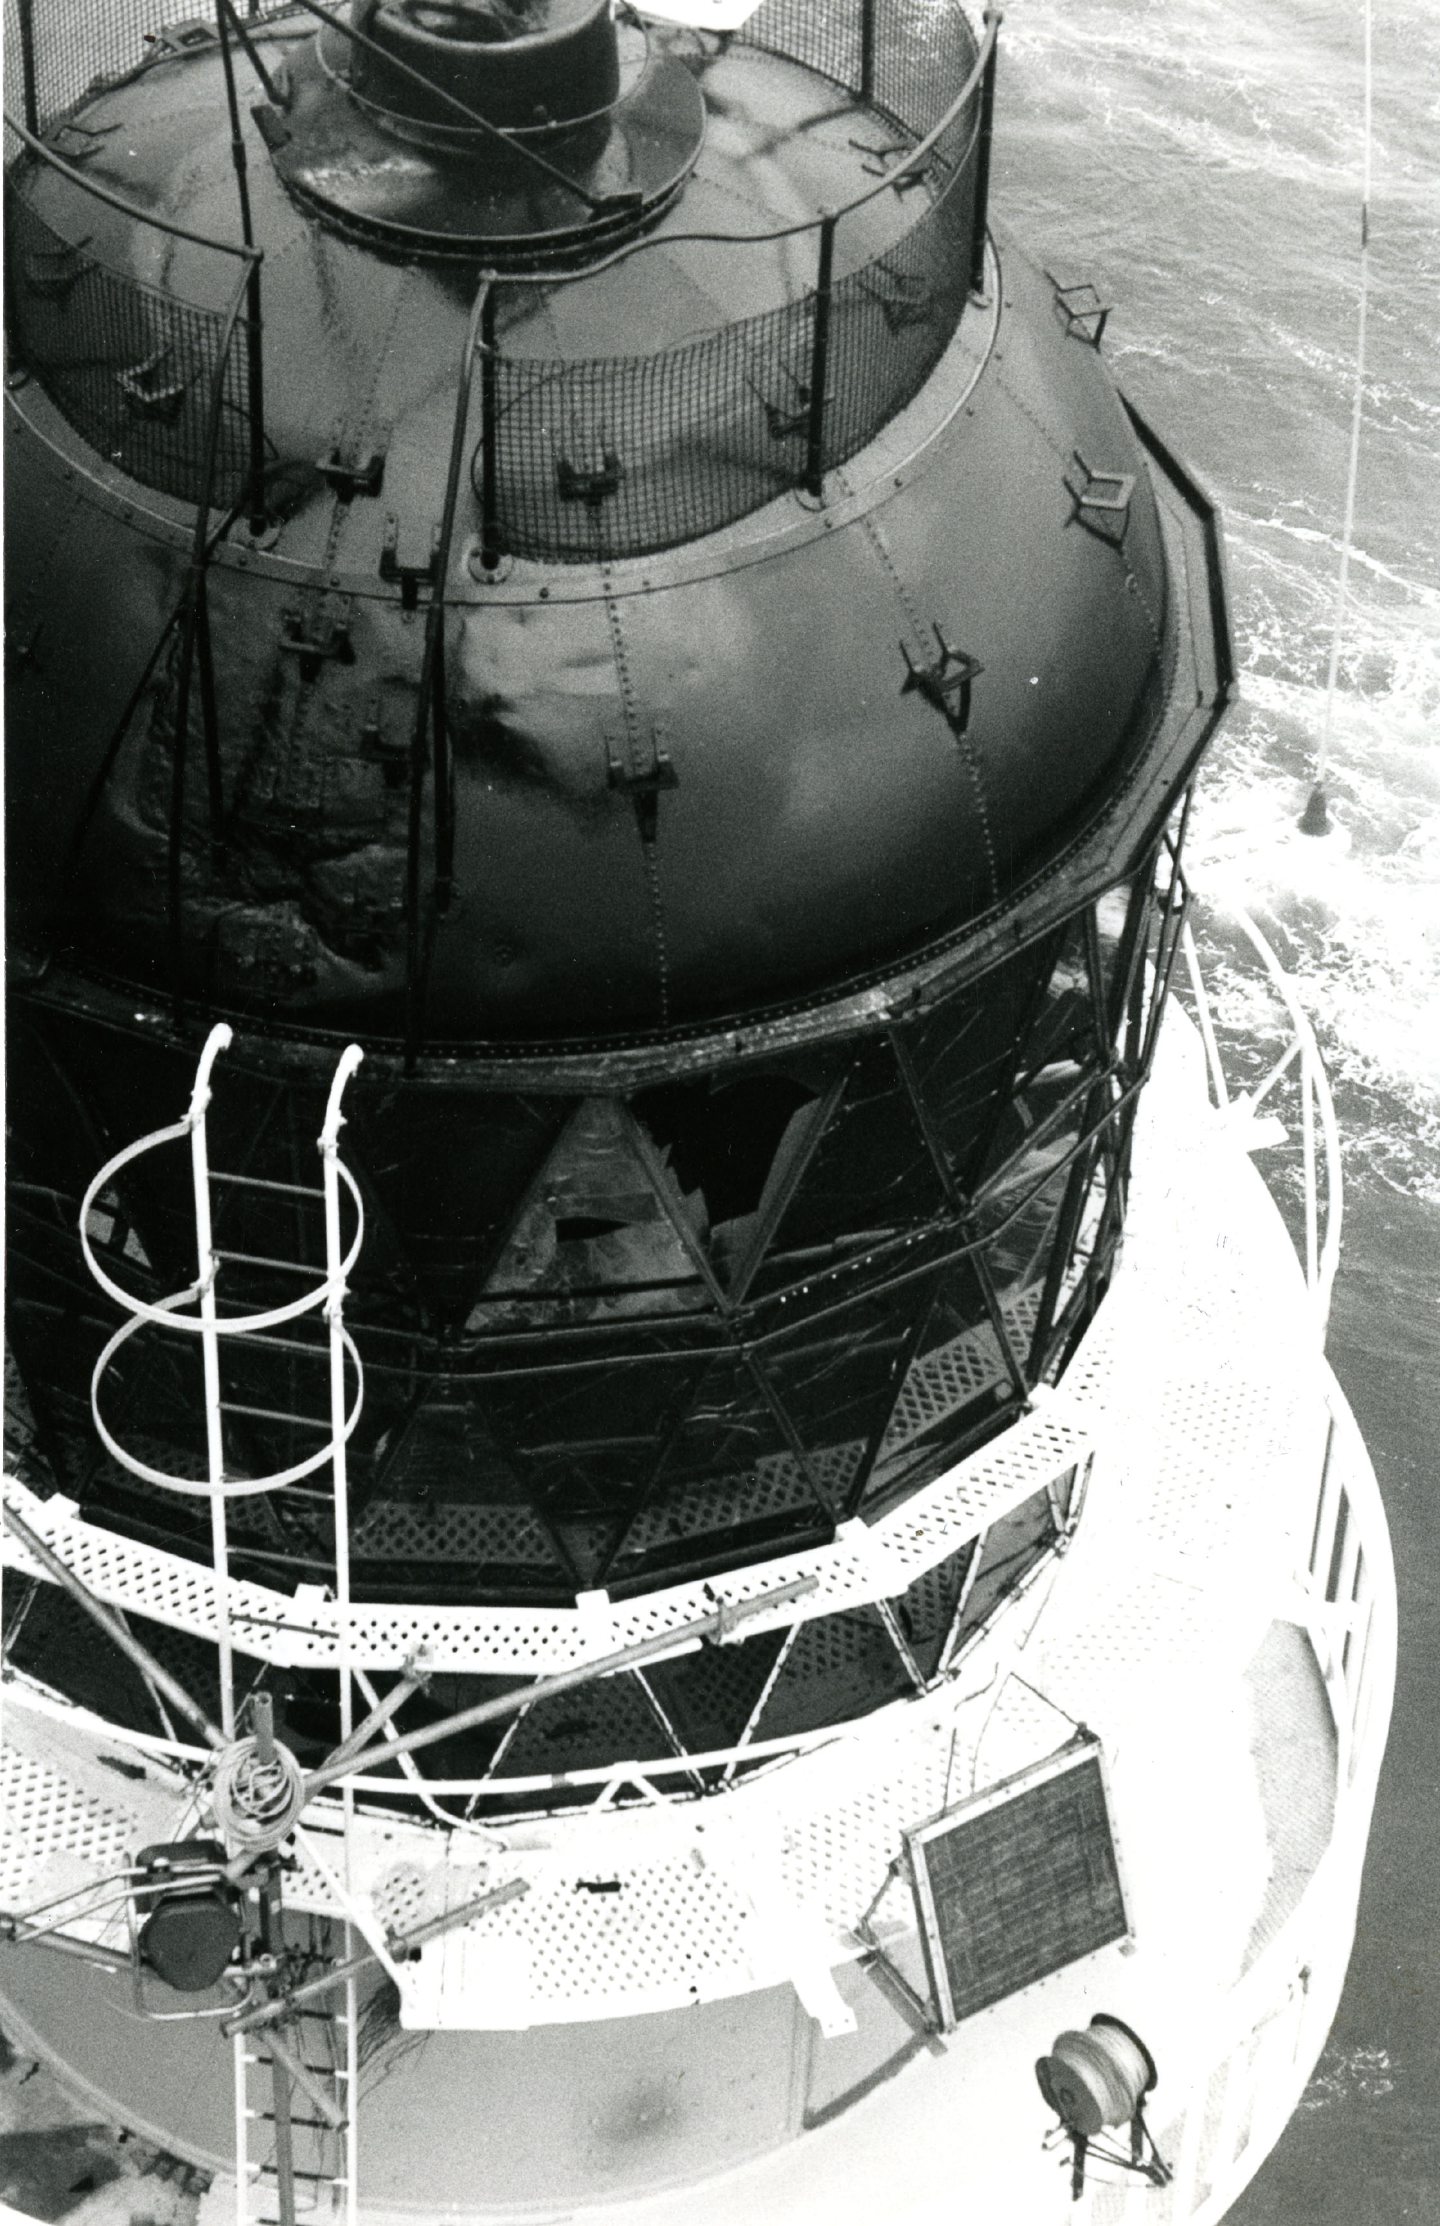 The damage to the lighthouse could be seen from the helicopter that rescued the three men.